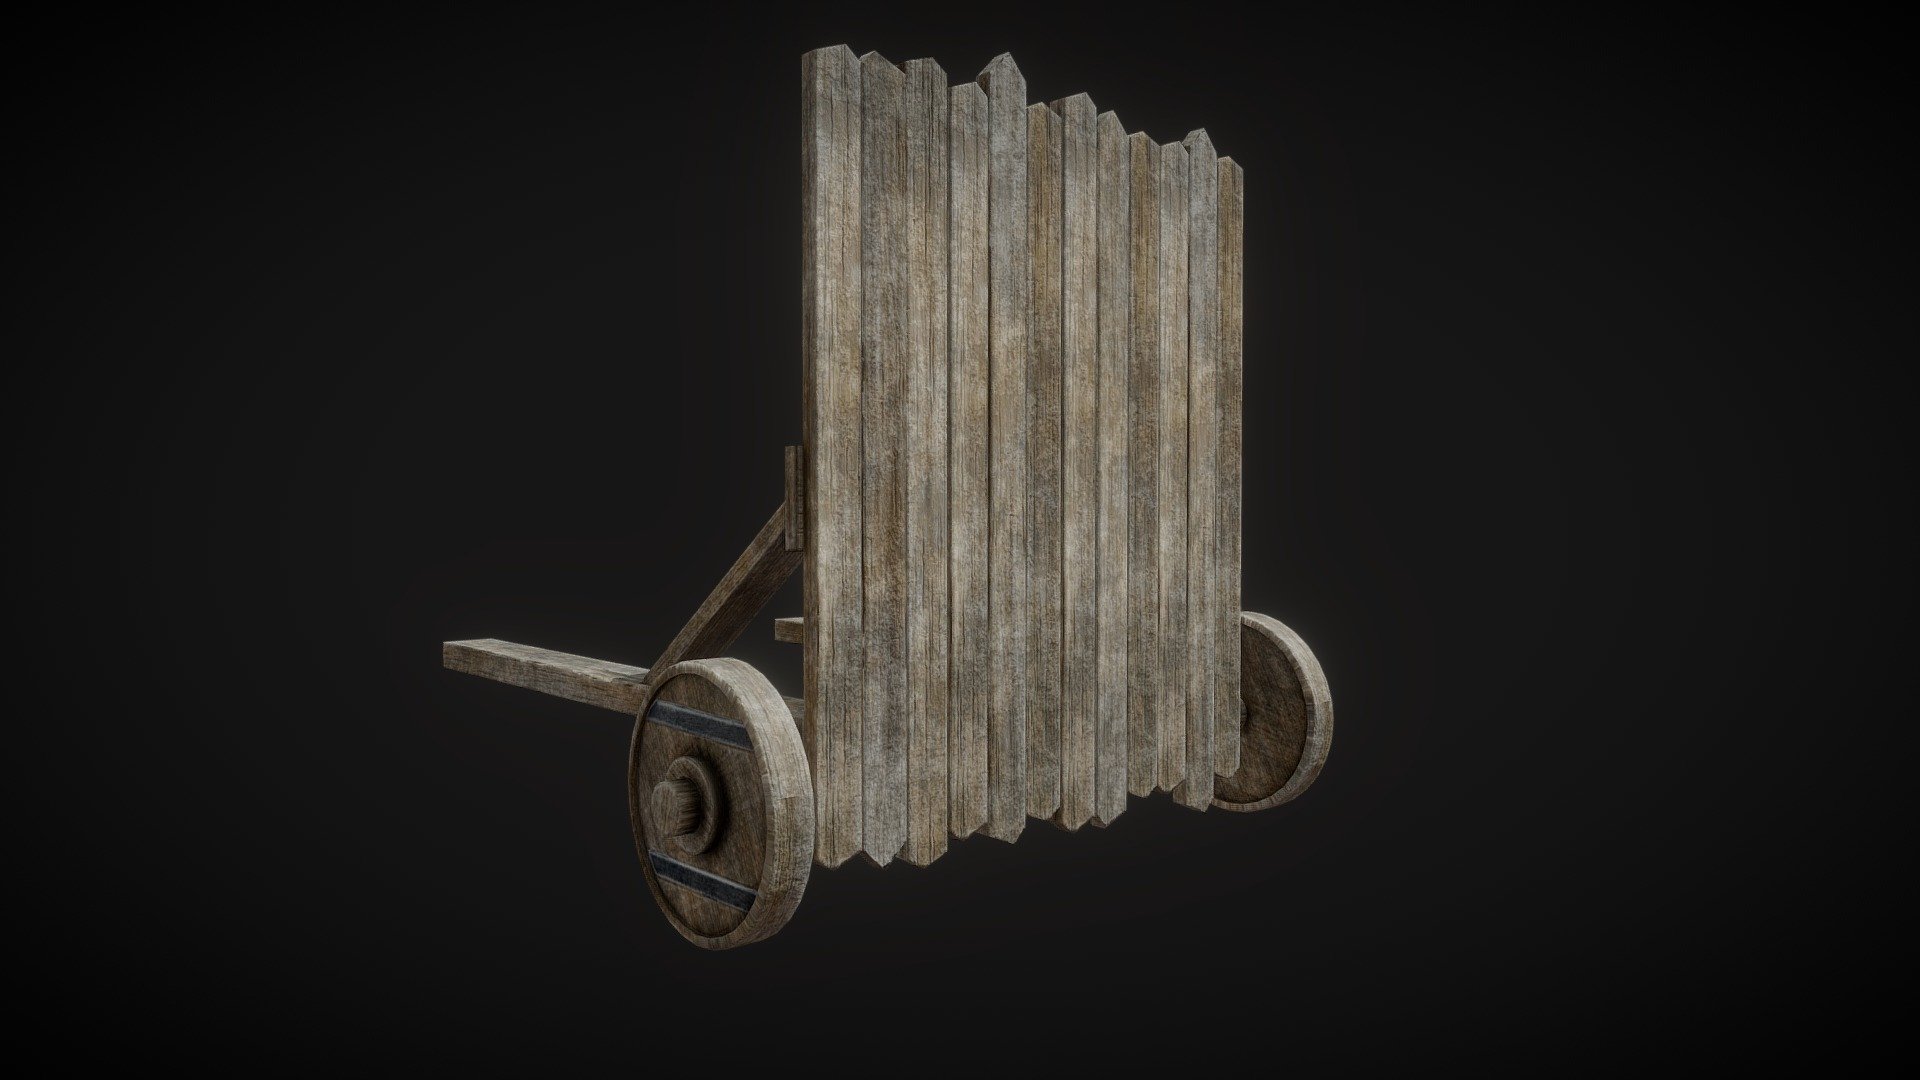 This is a wooden siege barricade. it will will part of a upcoming project that i am working on. the final scene will be a roman gate house under siege based off the total war game series. the model is fully textured and game ready 3d model